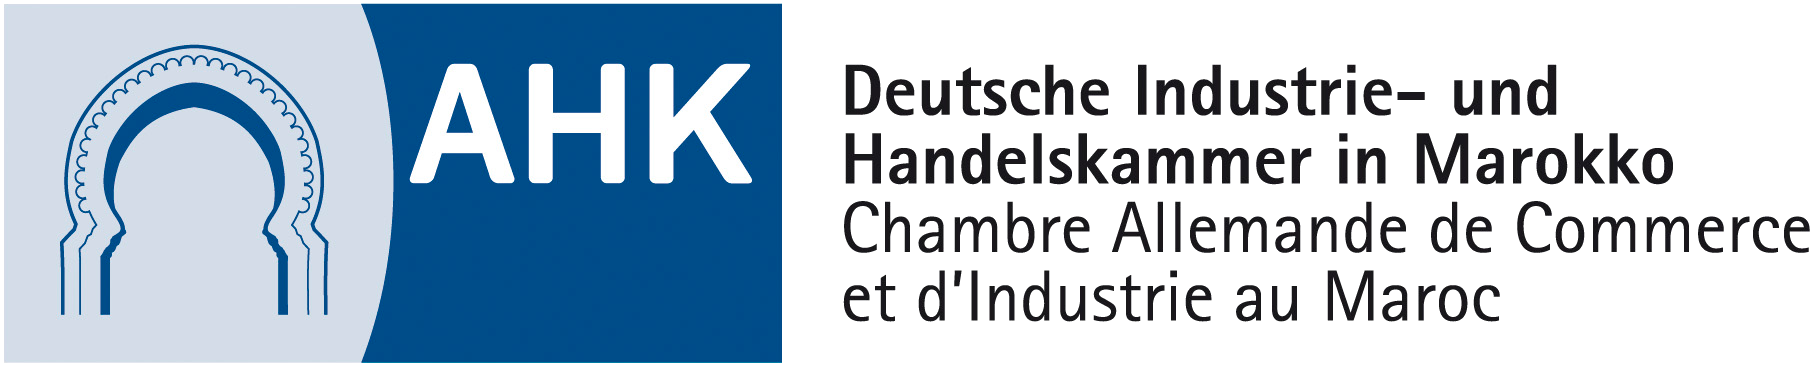 German Chamber of Commerce and Industry in Morocco